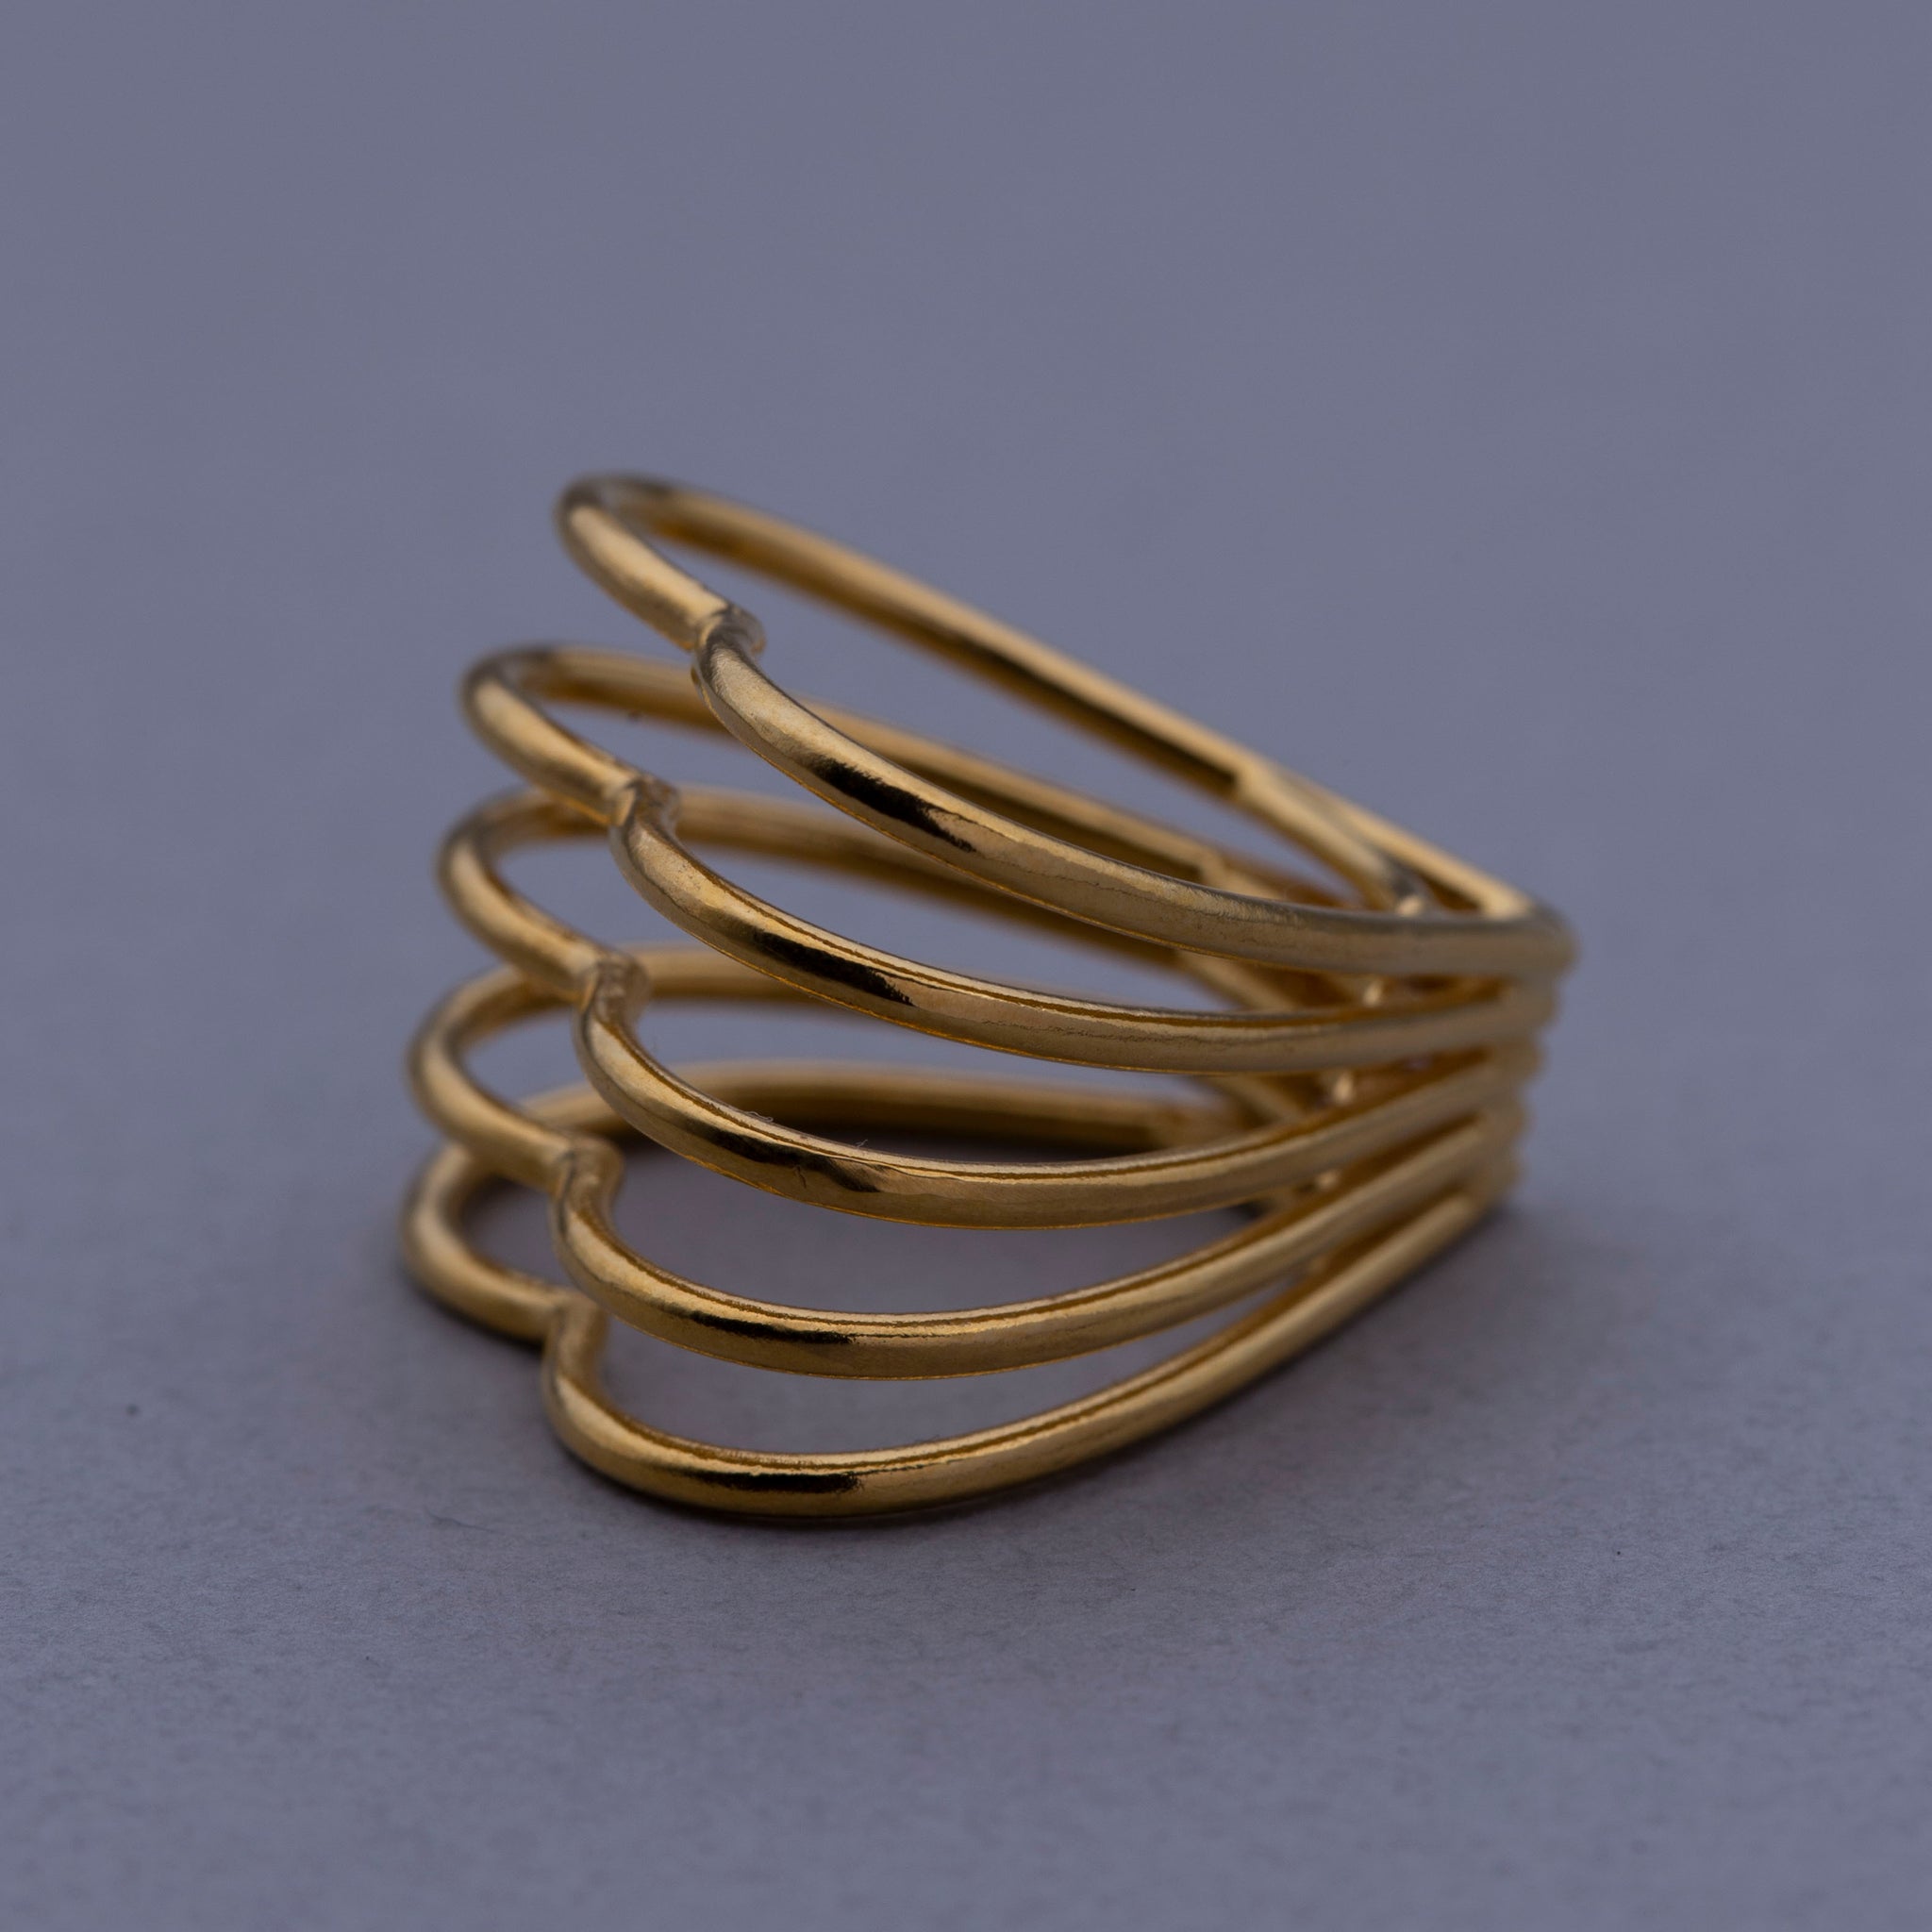 5Heart Tunnel ring gold